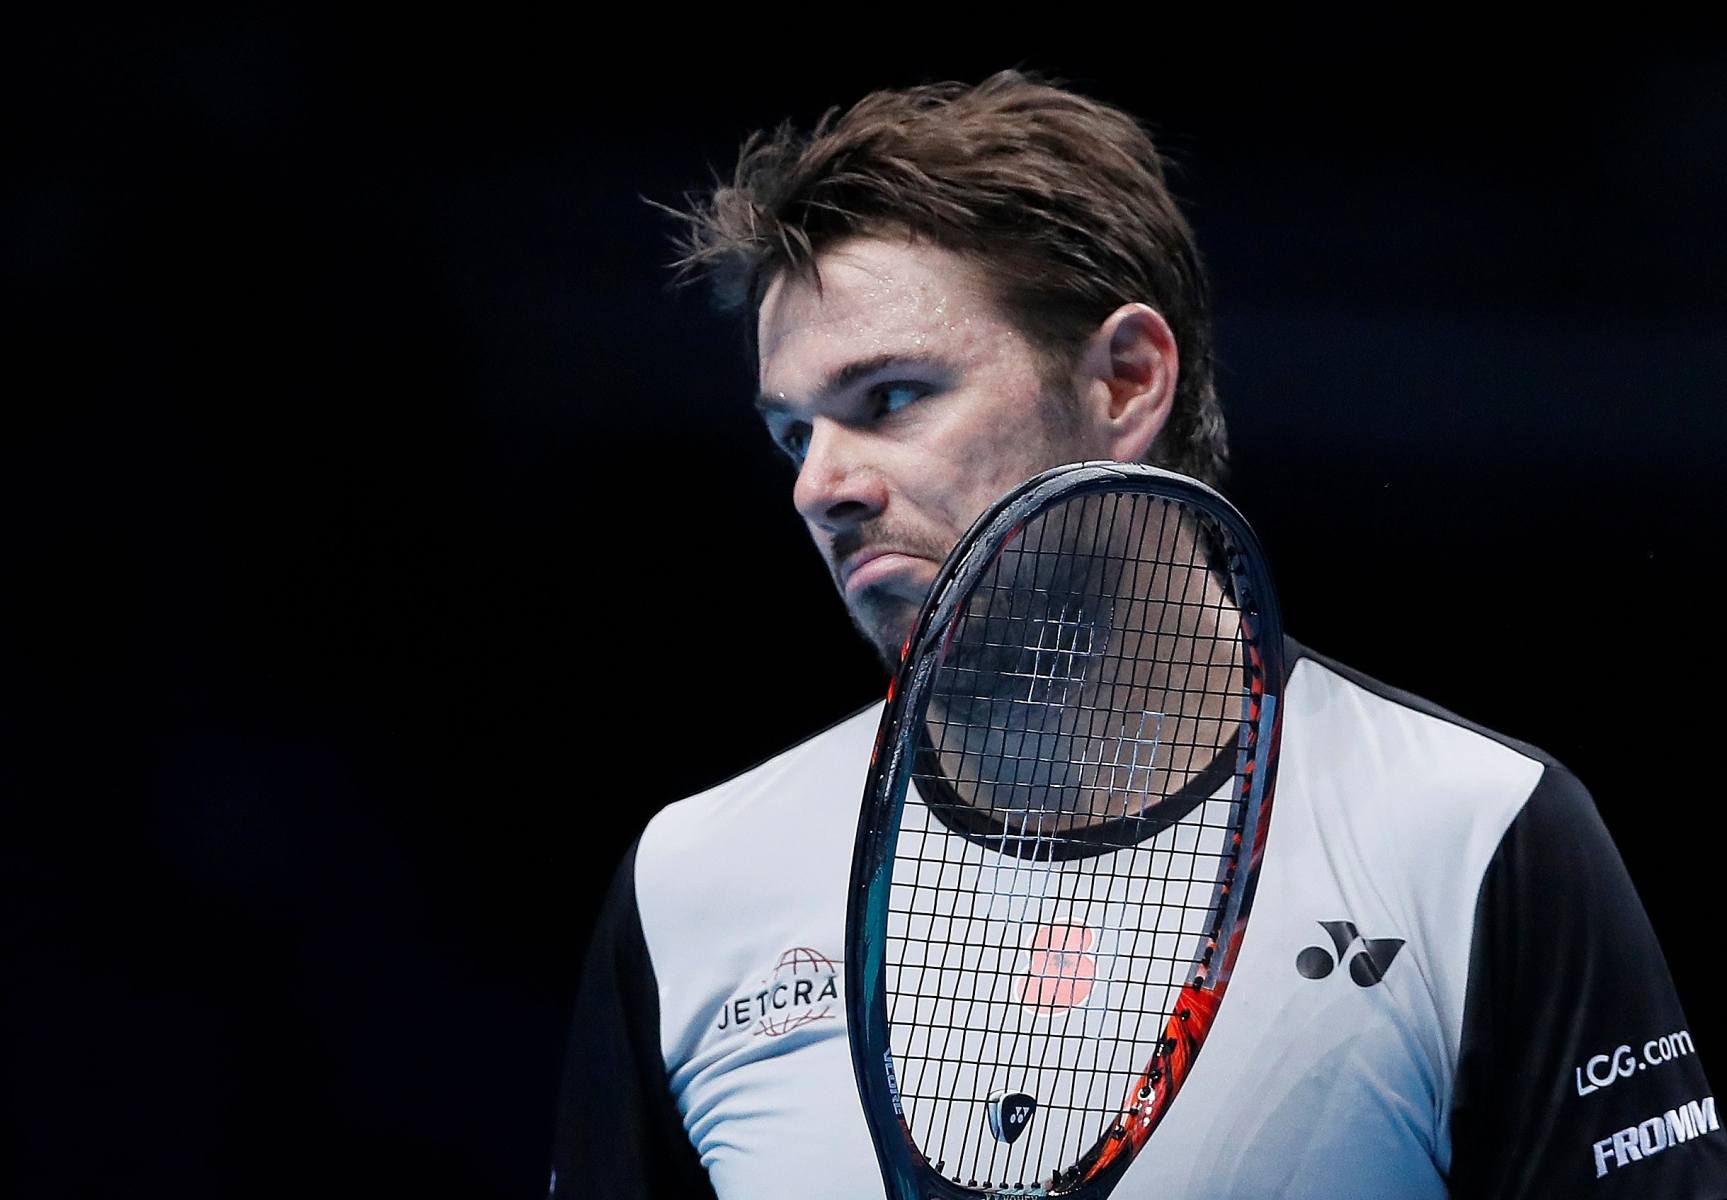 Stan Wawrinka of Switzerland after playing a return to Kei Nishikori of Japan during their ATP World Tour Finals singles tennis match at the O2 Arena in London, Monday, Nov. 14, 2016. (AP Photo/Kirsty Wigglesworth) Britain Tennis ATP Finals